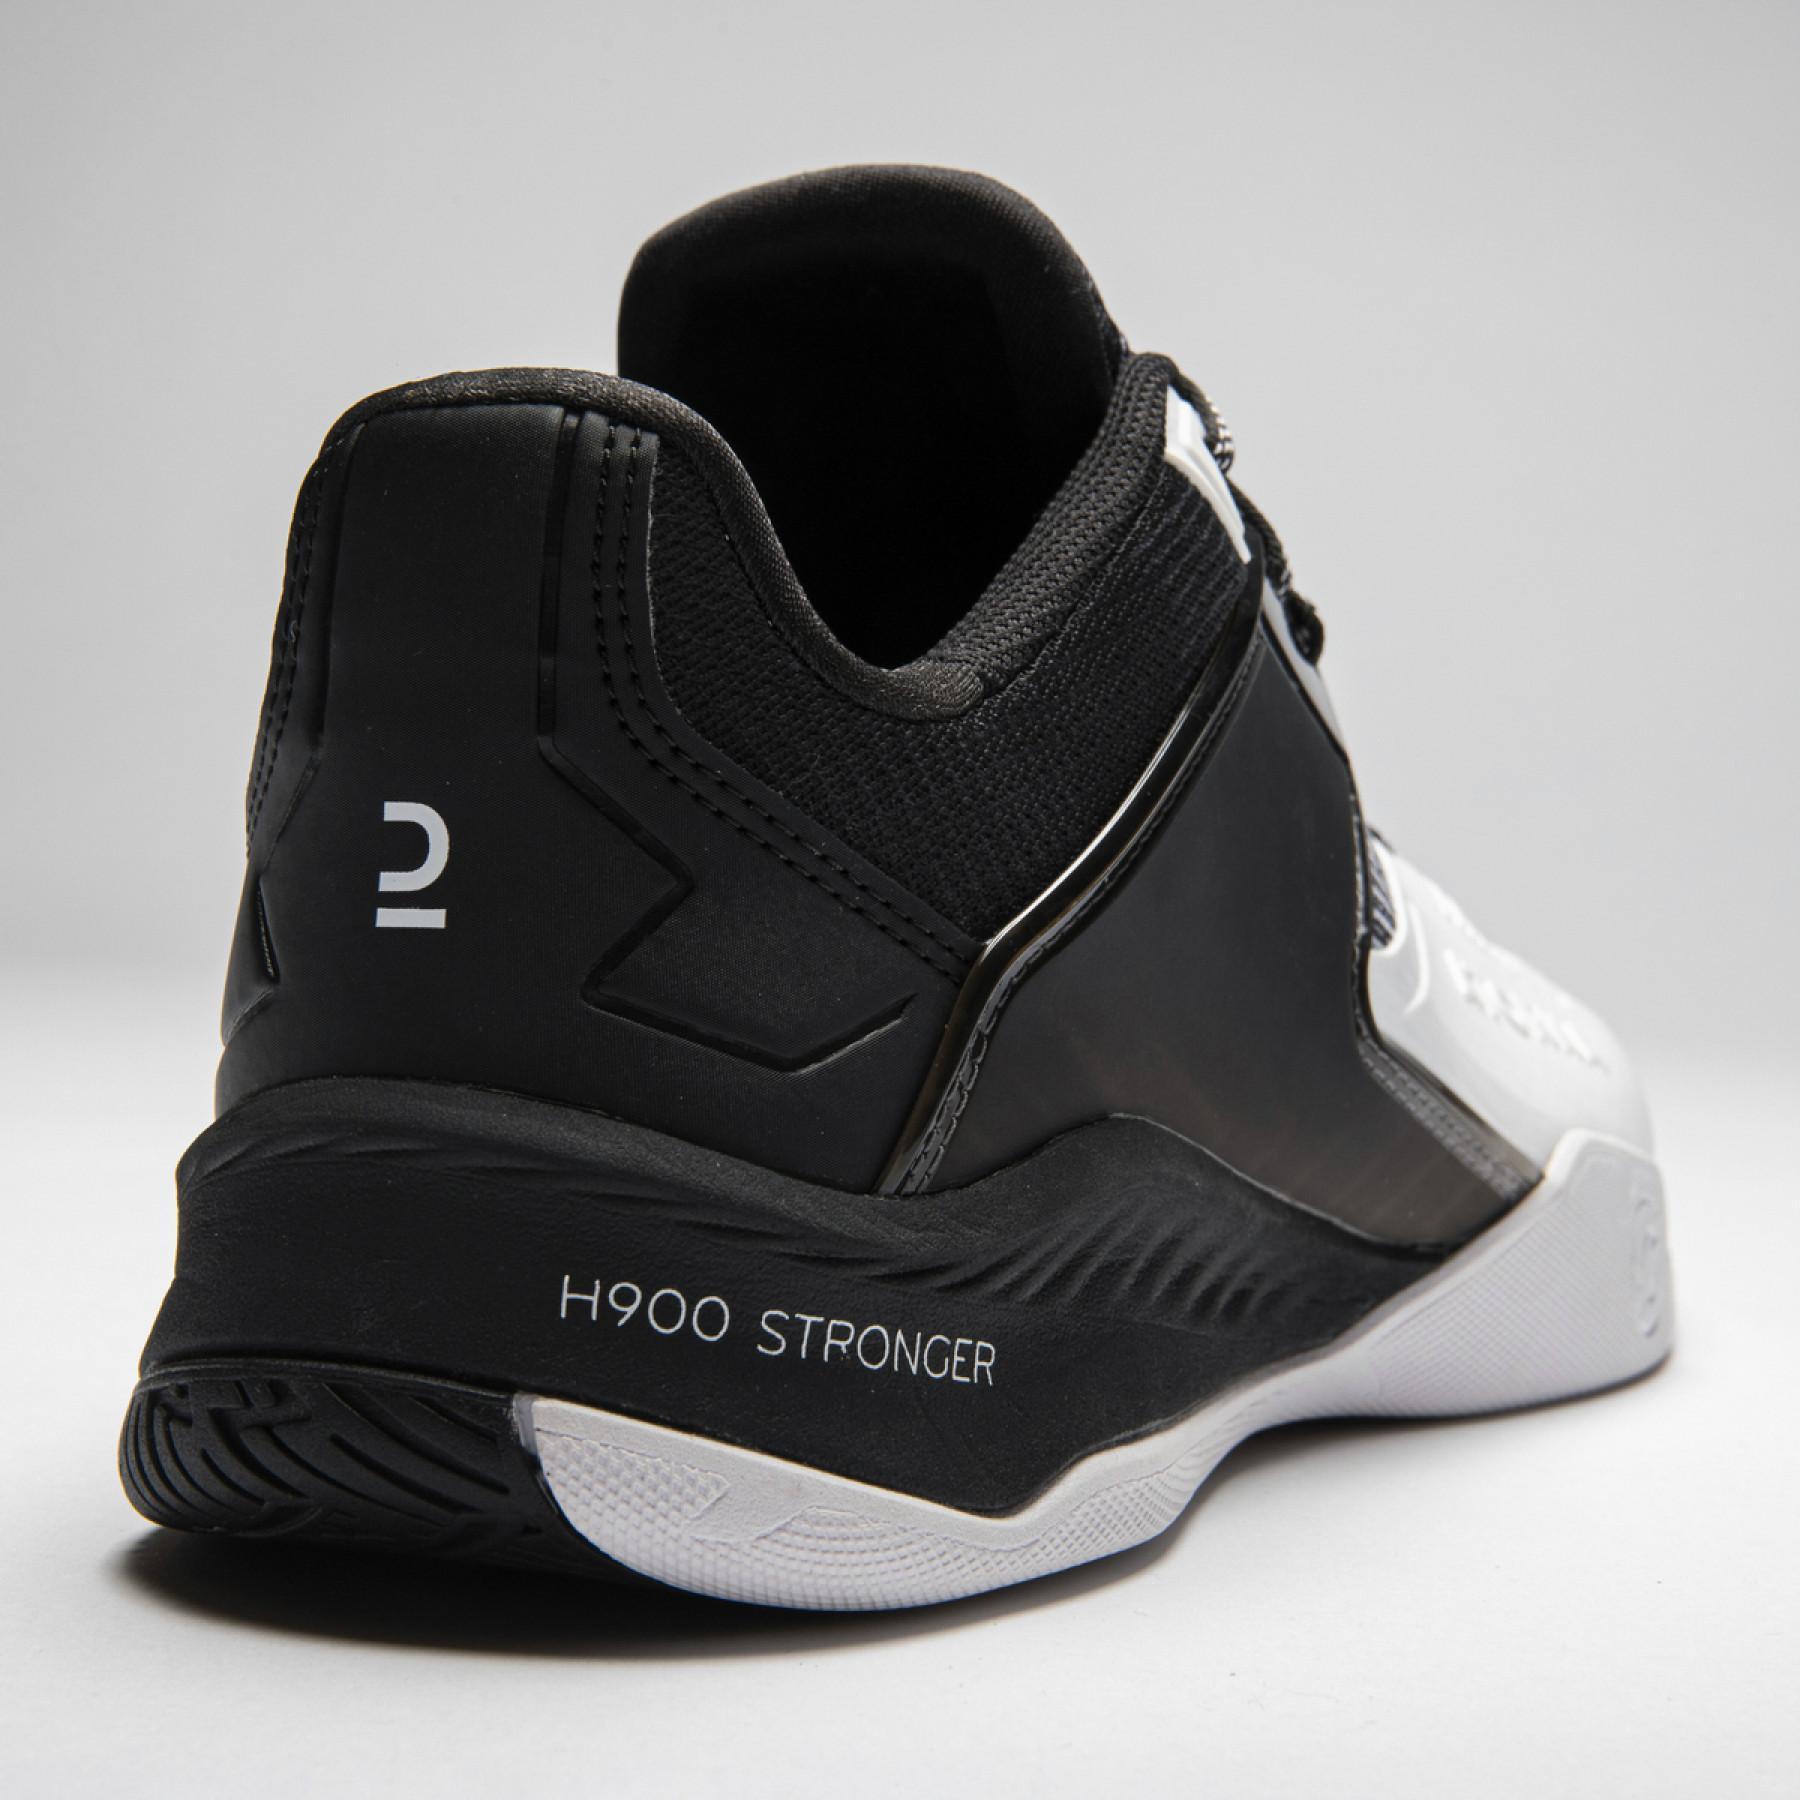 Chaussures Atorka 900 Stronger